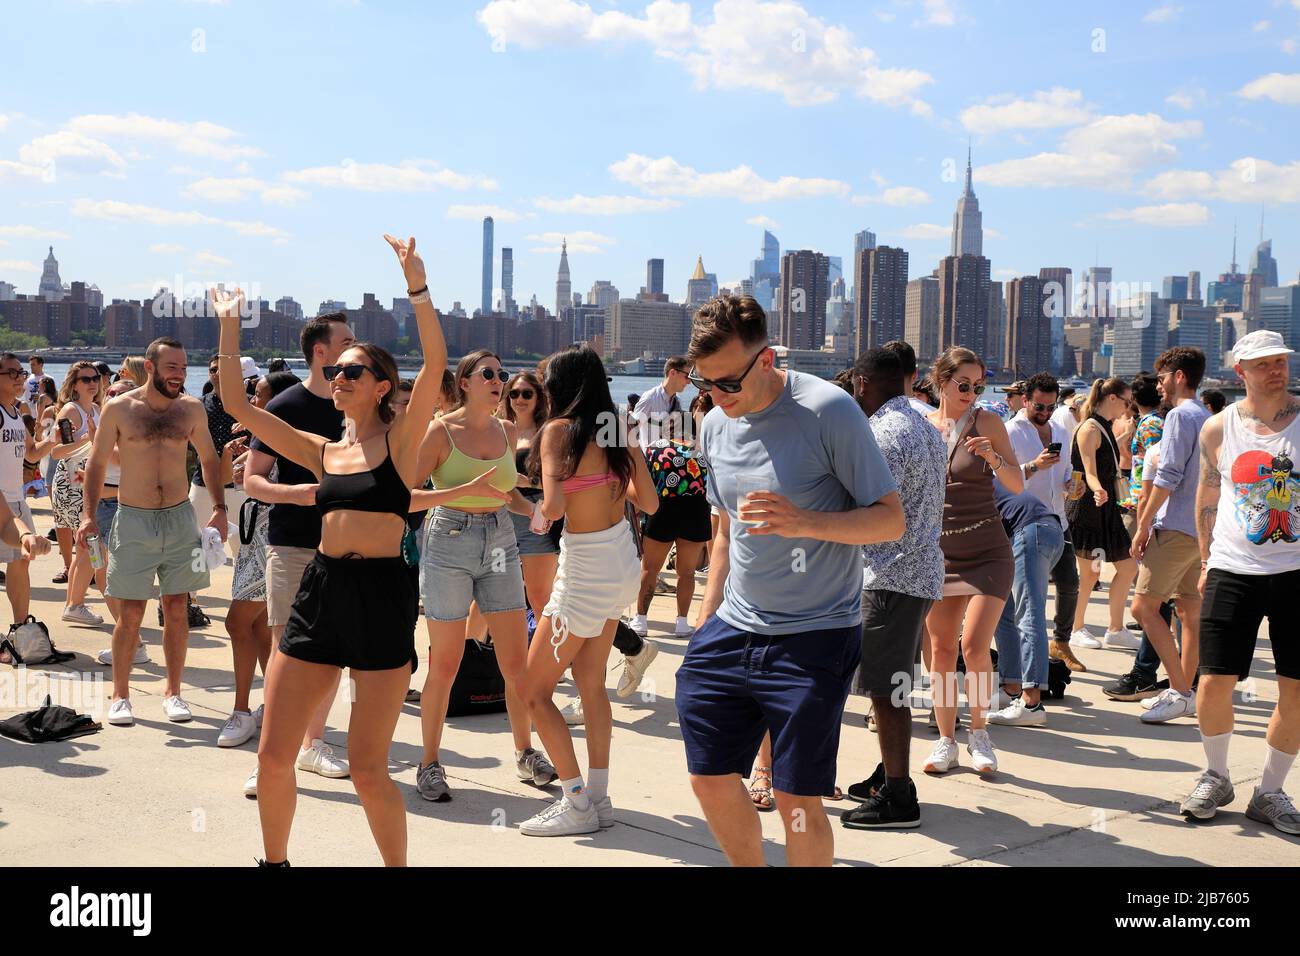 People dancing at the Hot Honey Sundays outdoor dance party in Greenpoint Terminal Market with East River and Manhattan skyline in the background.Greenpoint.Brooklyn.New York City.USA Stock Photo